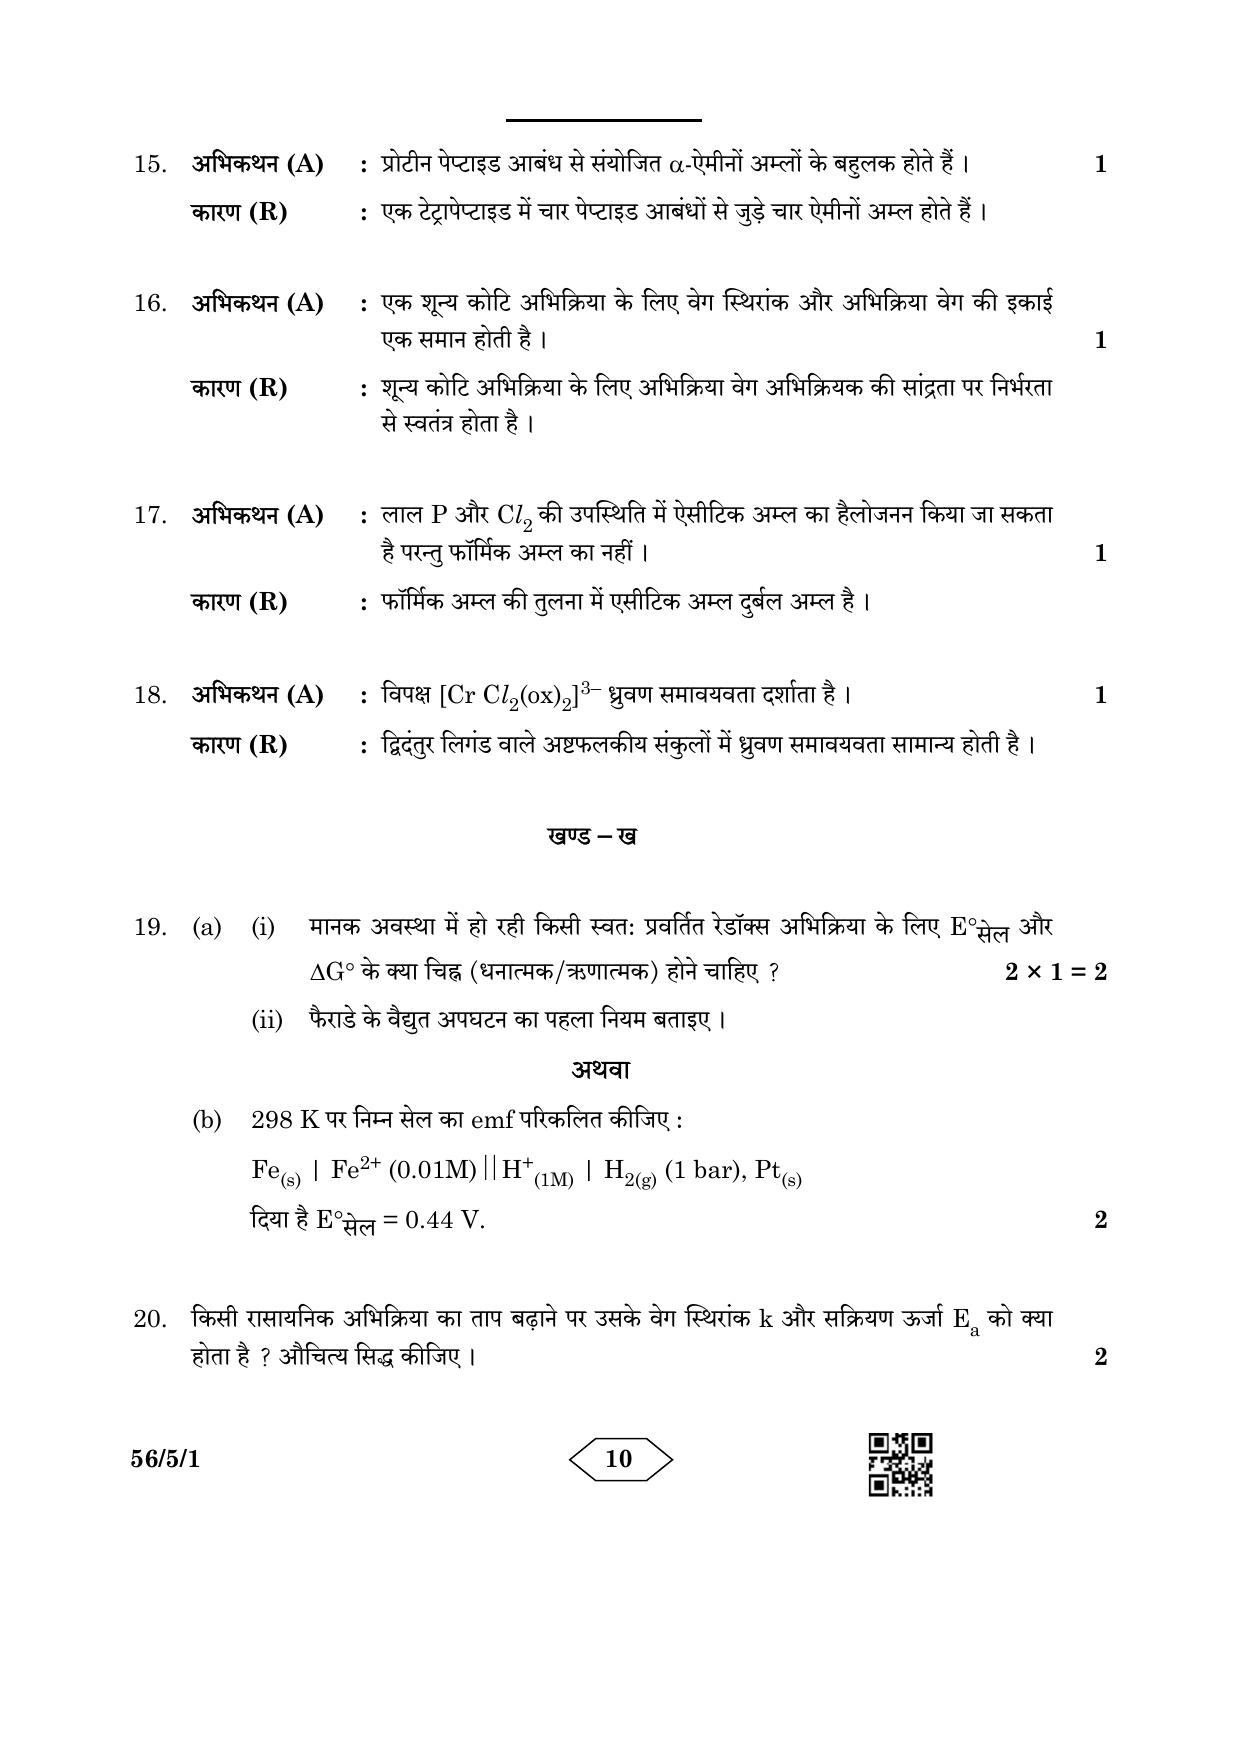 CBSE Class 12 56-5-1 Chemistry 2023 Question Paper - Page 10